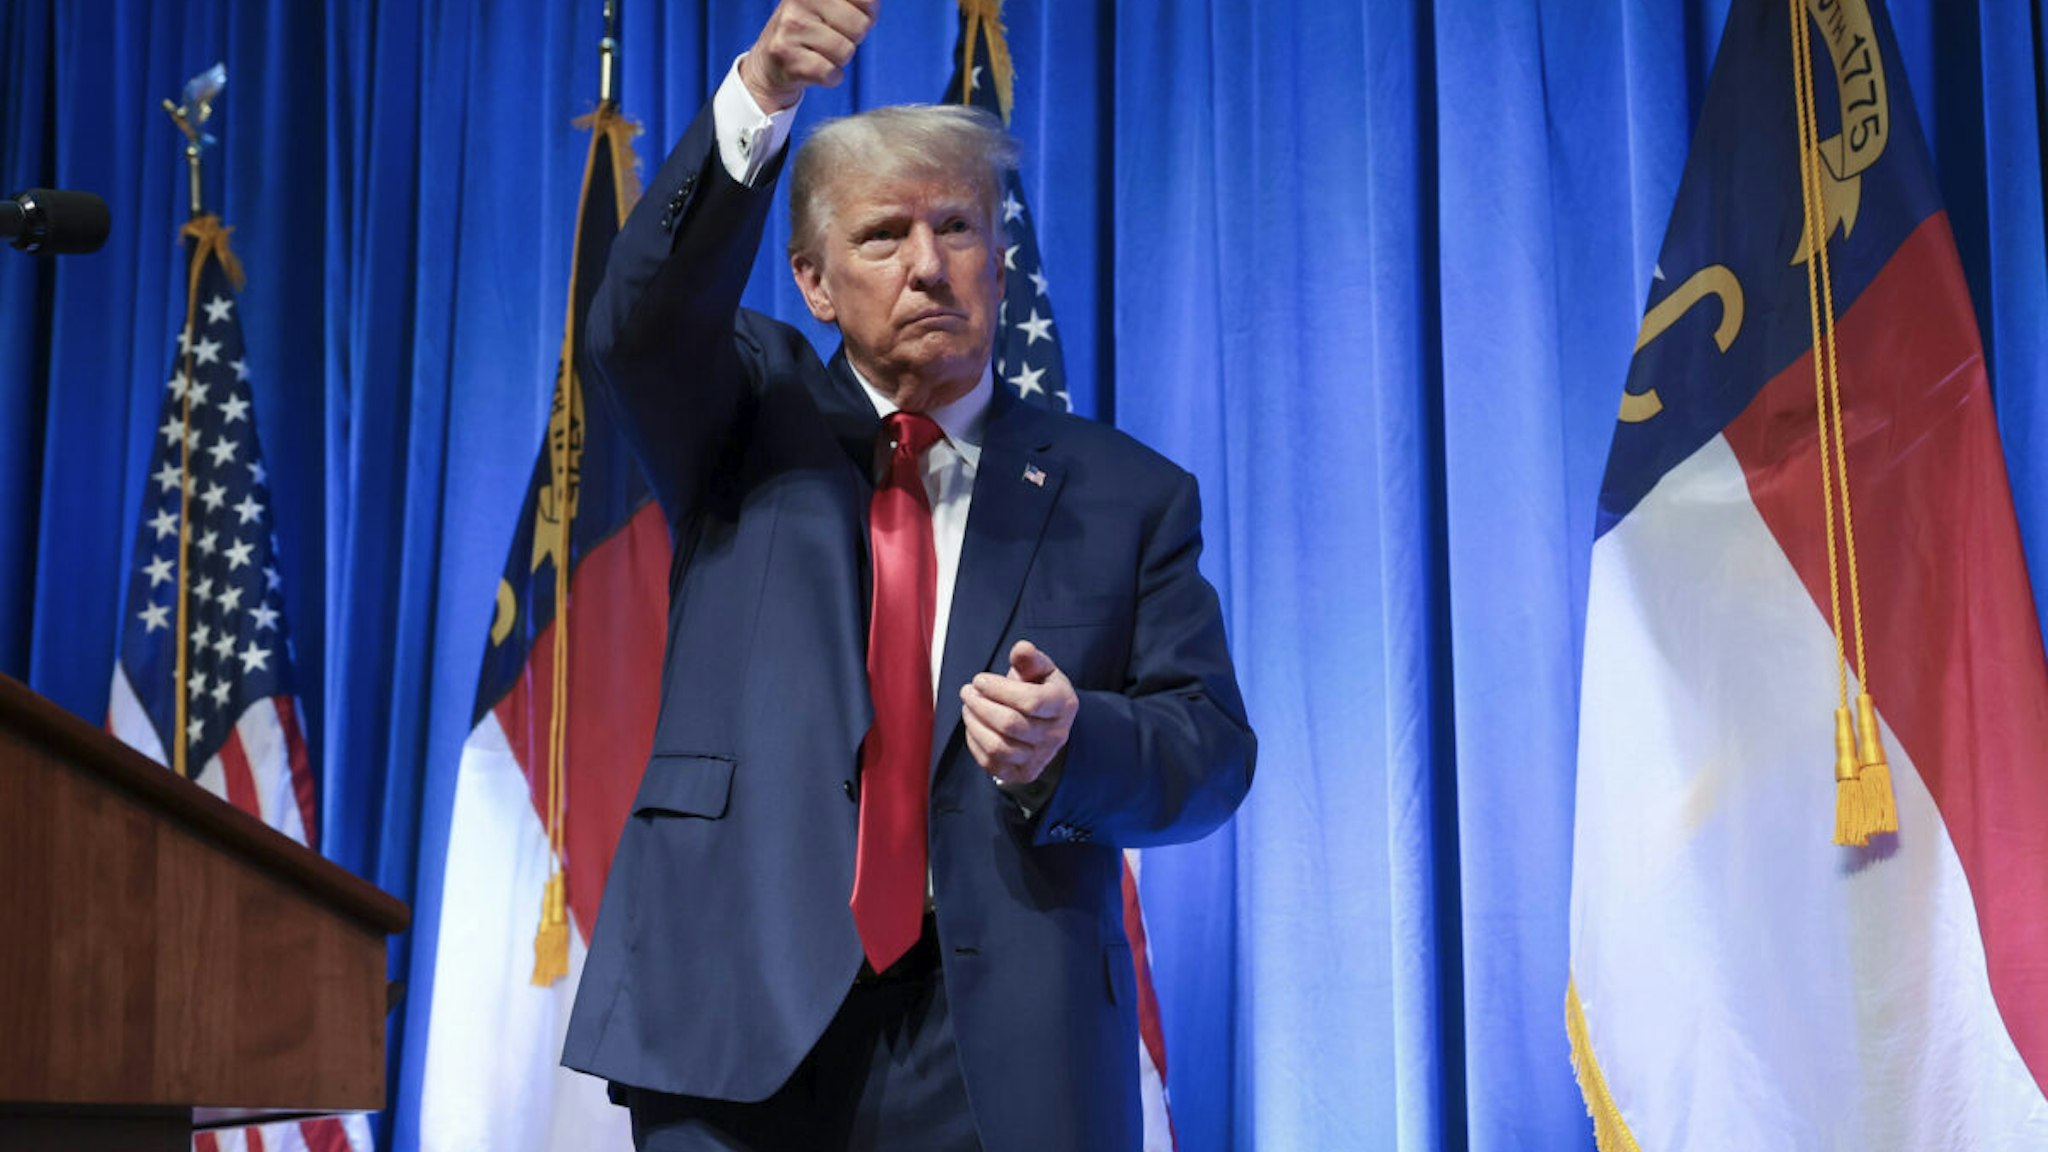 GREENSBORO, NORTH CAROLINA - JUNE 10: Republican presidential candidate former U.S. President Donald Trump gestures to the audience after delivering remarks June 10, 2023 in Greensboro, North Carolina. Trump spoke during the North Carolina Republican party’s annual state convention two days after becoming the first former U.S. president indicted on federal charges.